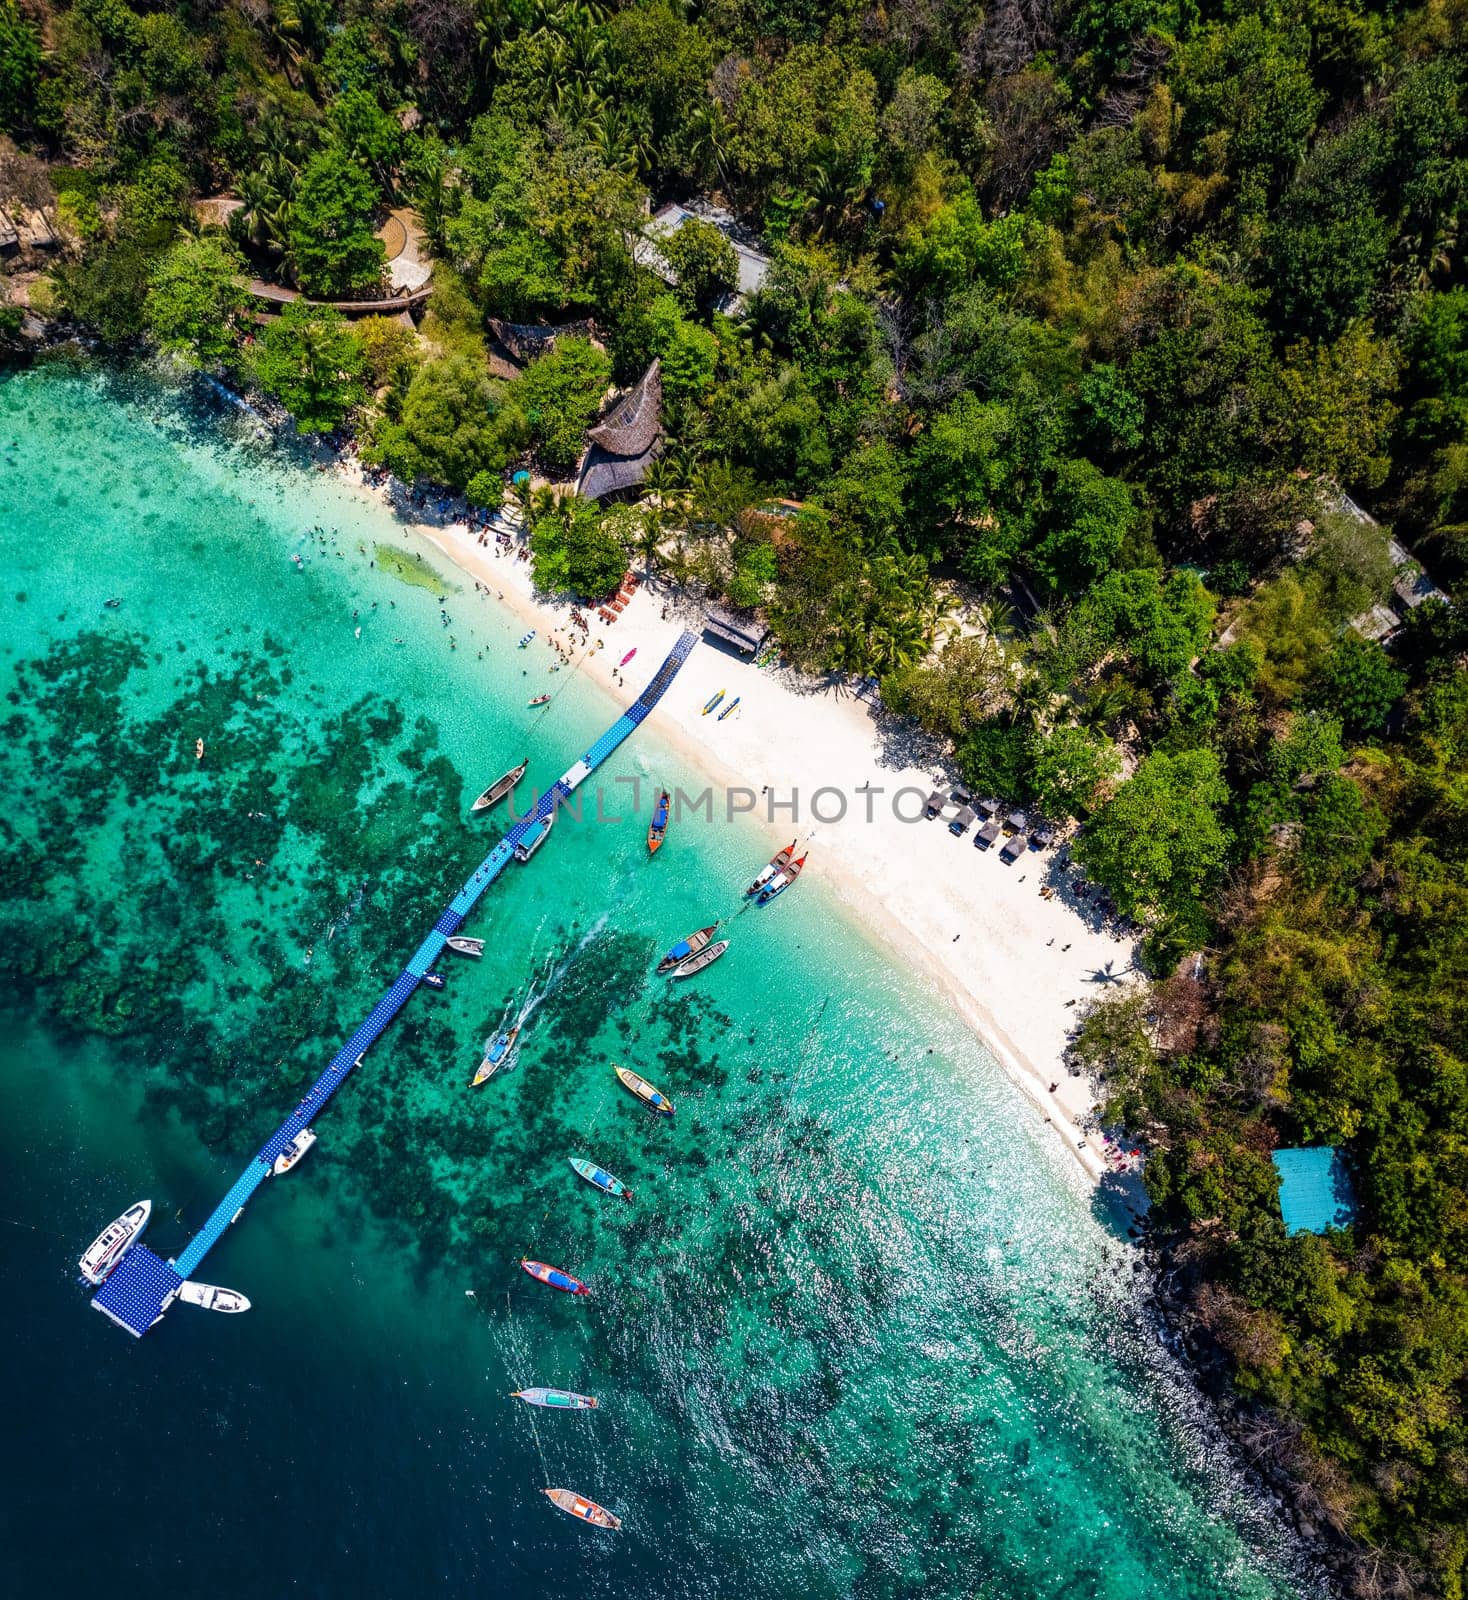 Aerial view of Coral island or Koh hey in Phuket, Thailand, south east asia